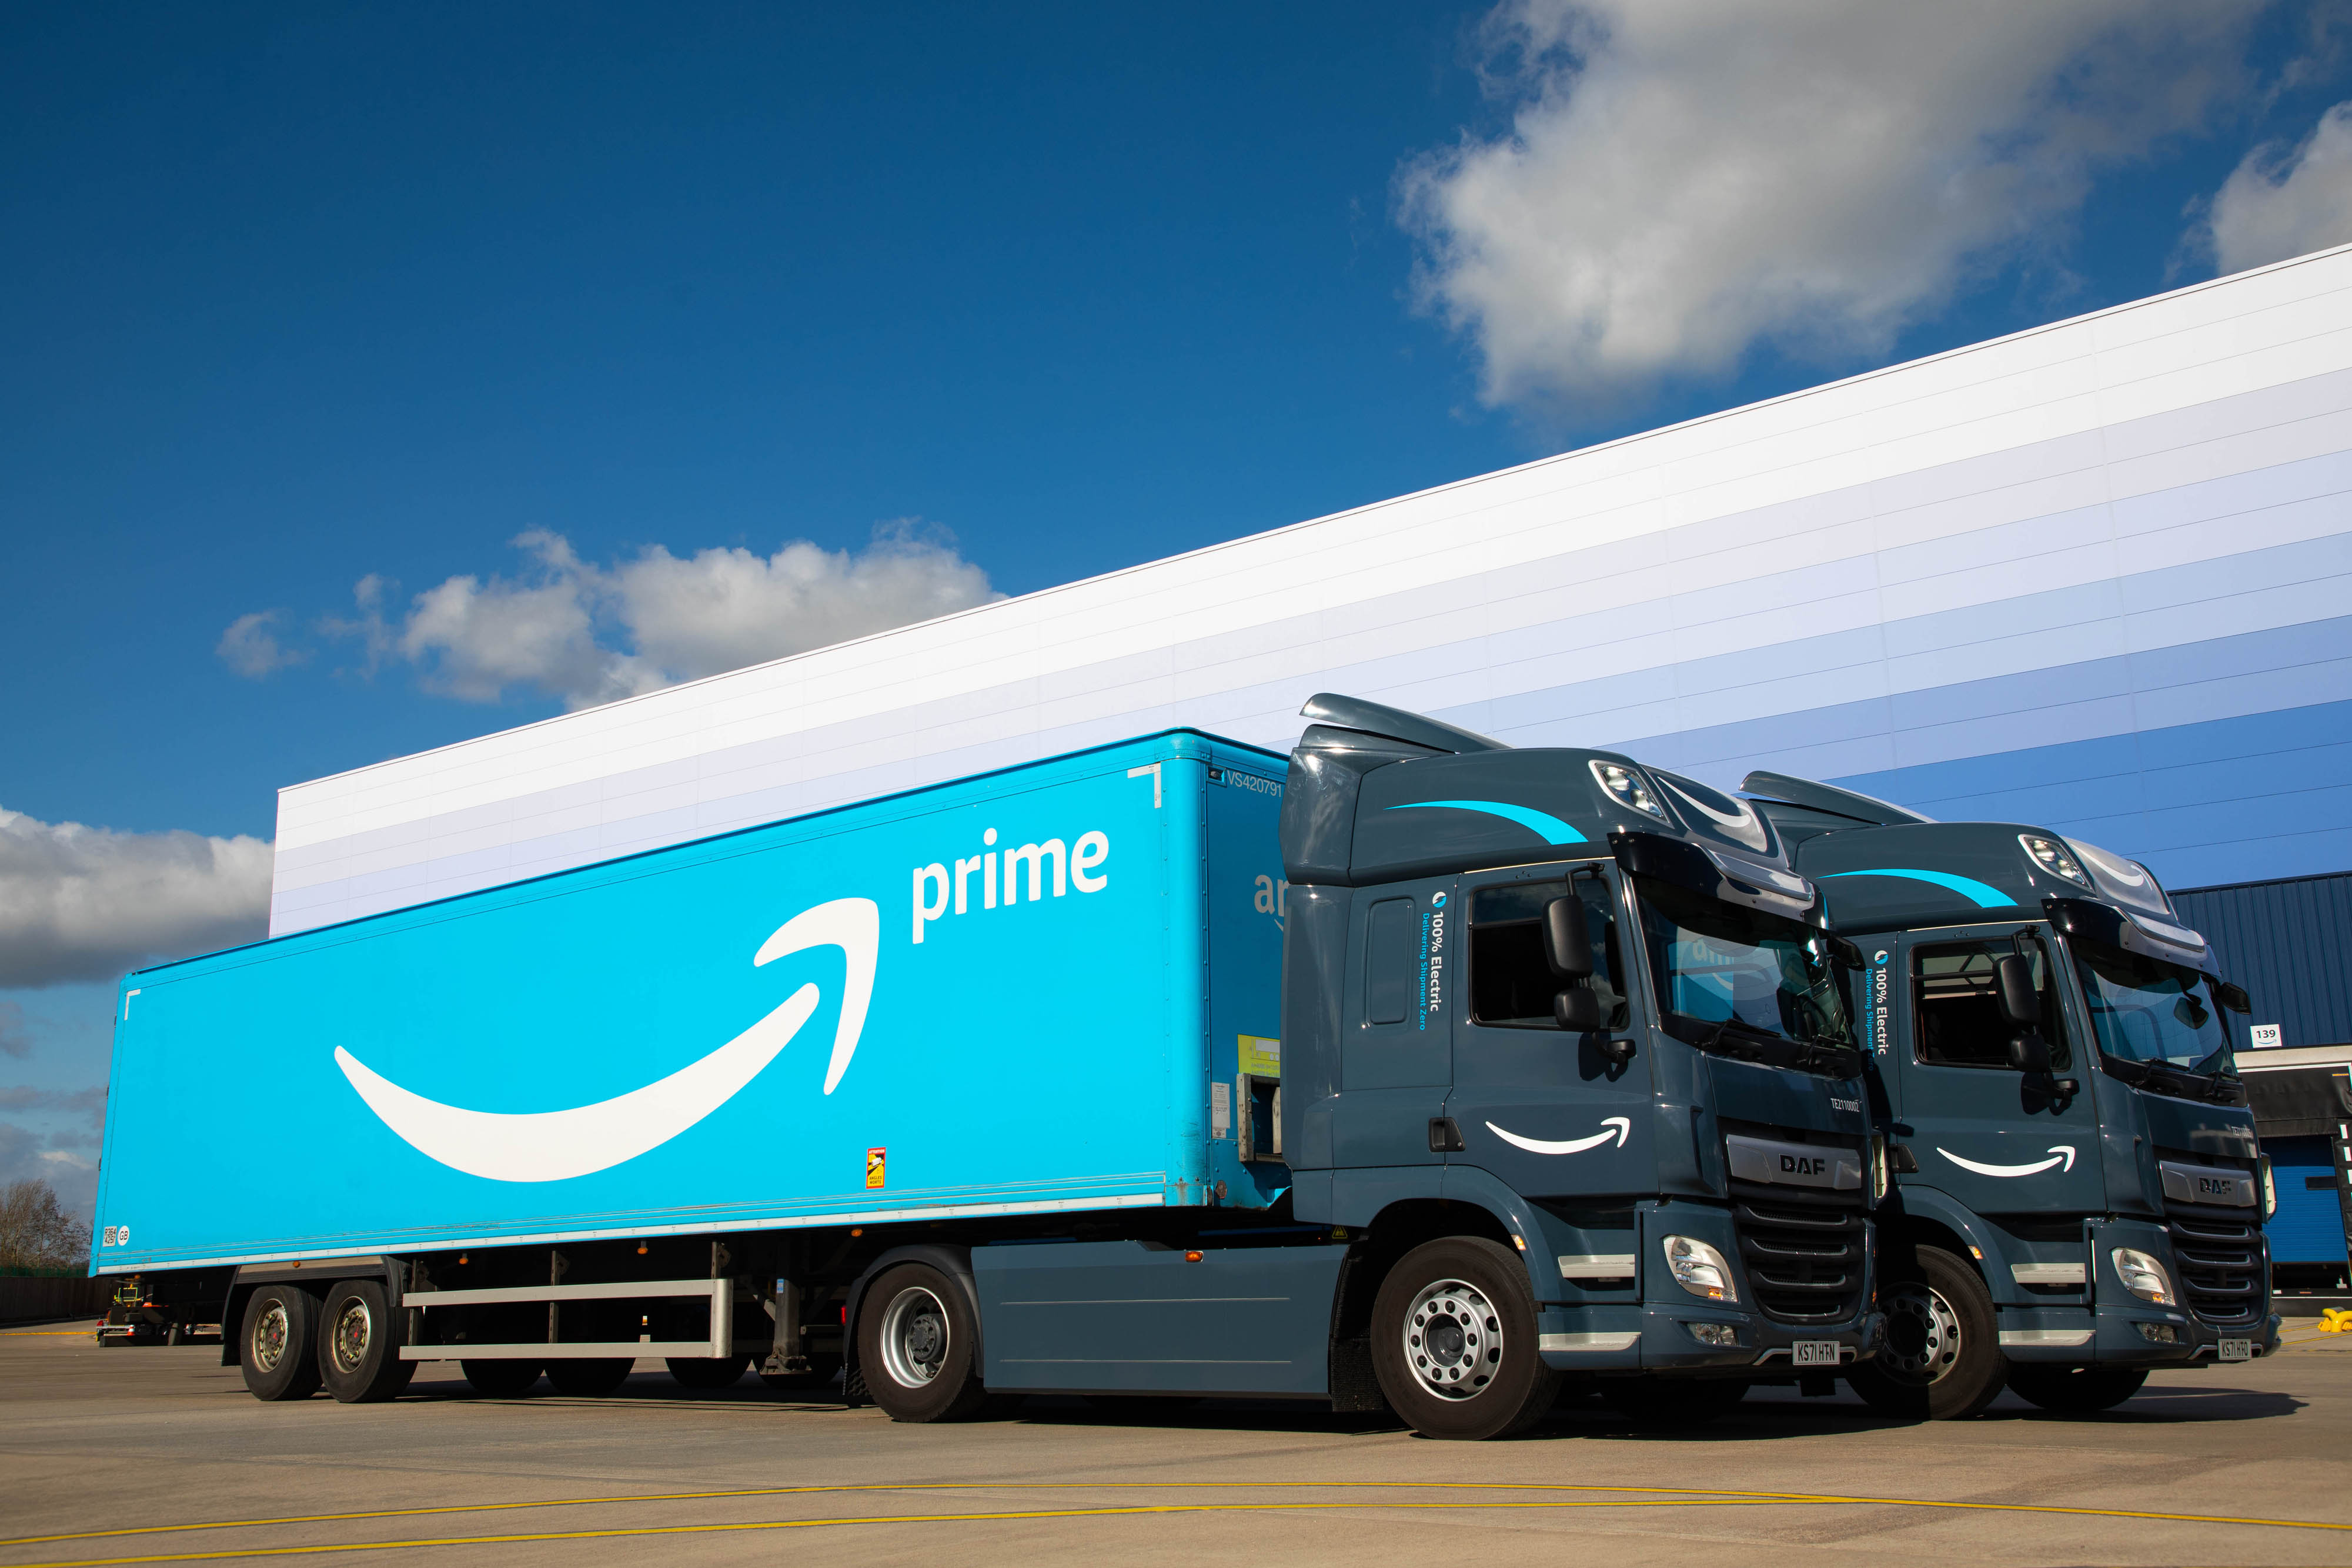 Amazon unveils its first fullyelectric HGV delivery trucks Electric